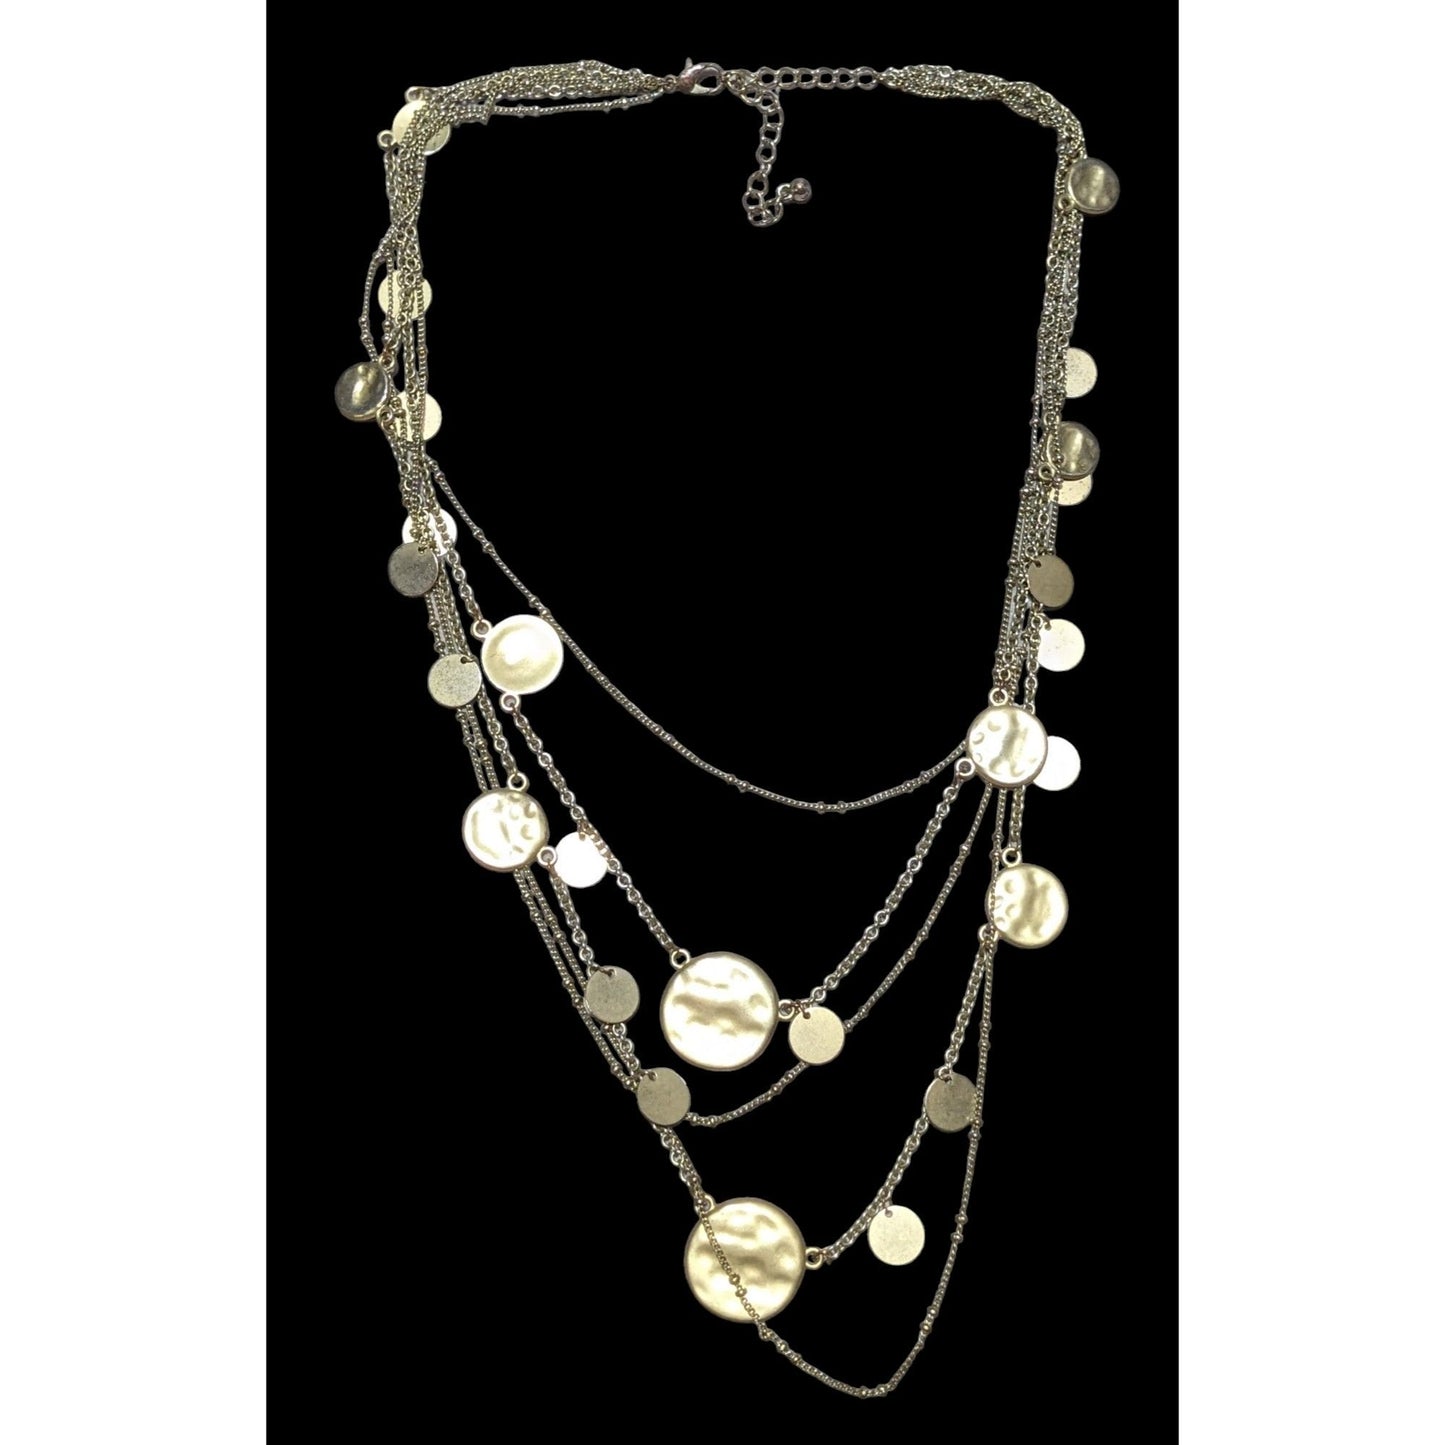 Gold Tone Multilayer Hammered Disc Chain Necklace